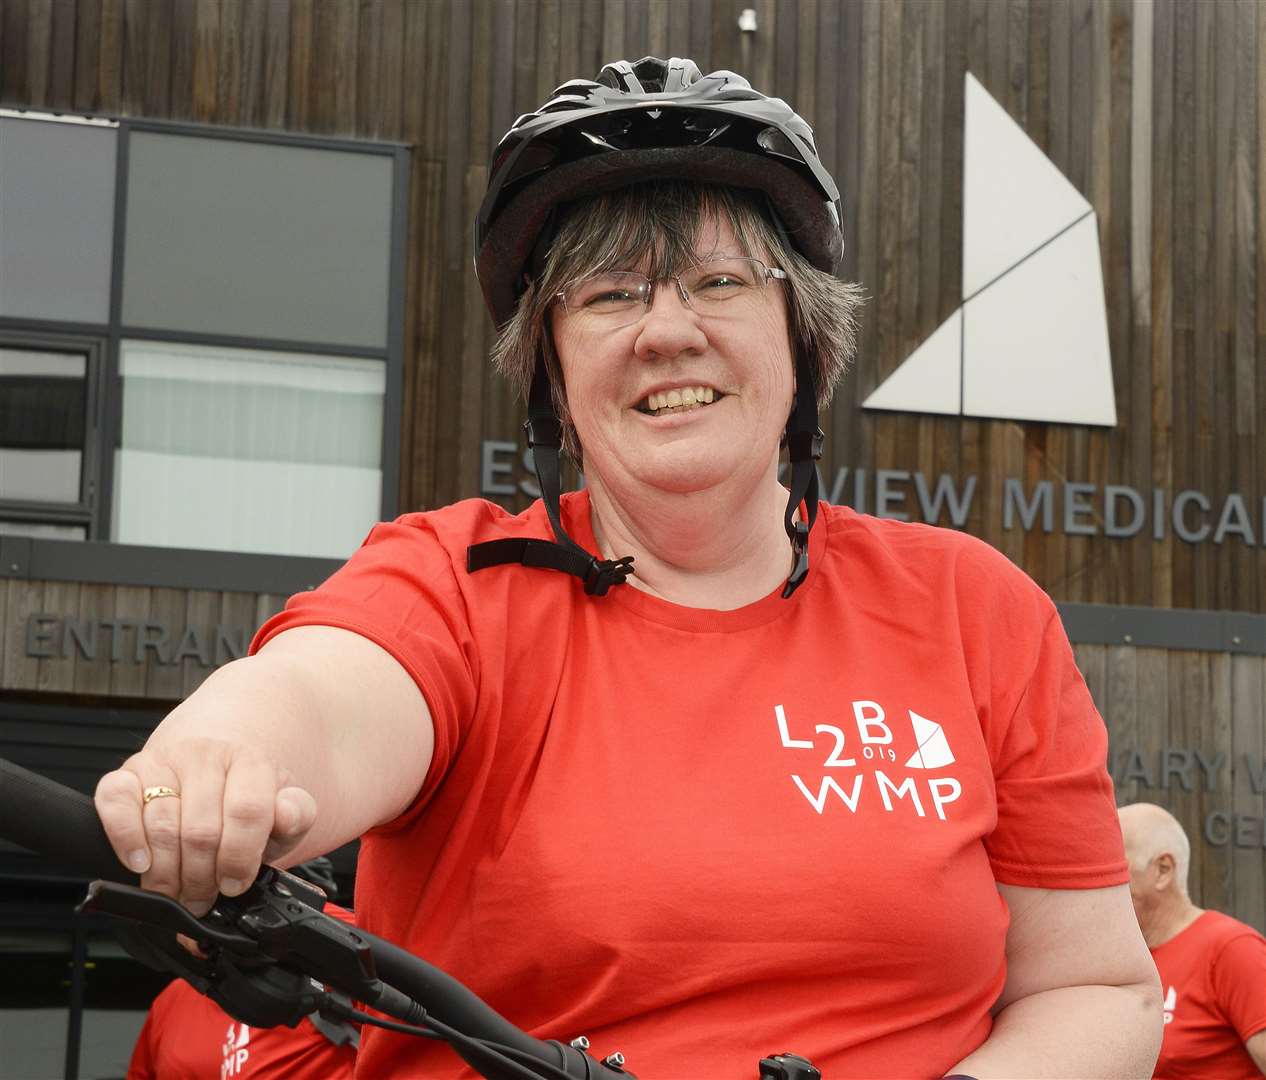 In 2019, Dr Chandler and her colleagues completed the London to Brighton bike ride in memory of popular town GP Dr Lakshman Kanagasooriam. Picture: Paul Amos